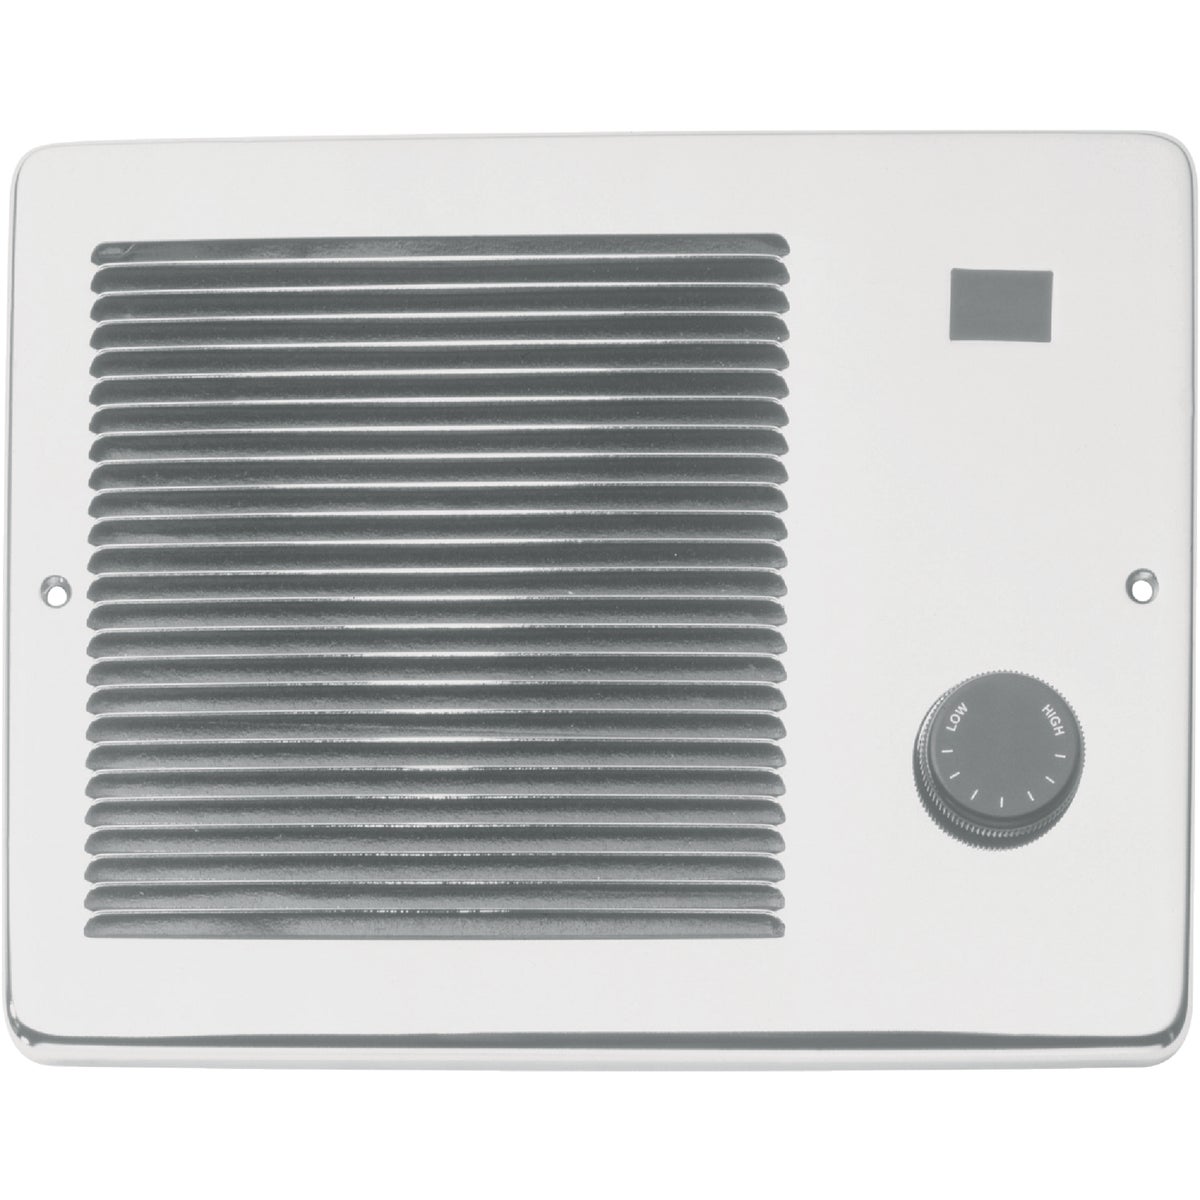 Broan 1500W 120V Comfort-Flo Electric Wall Heater